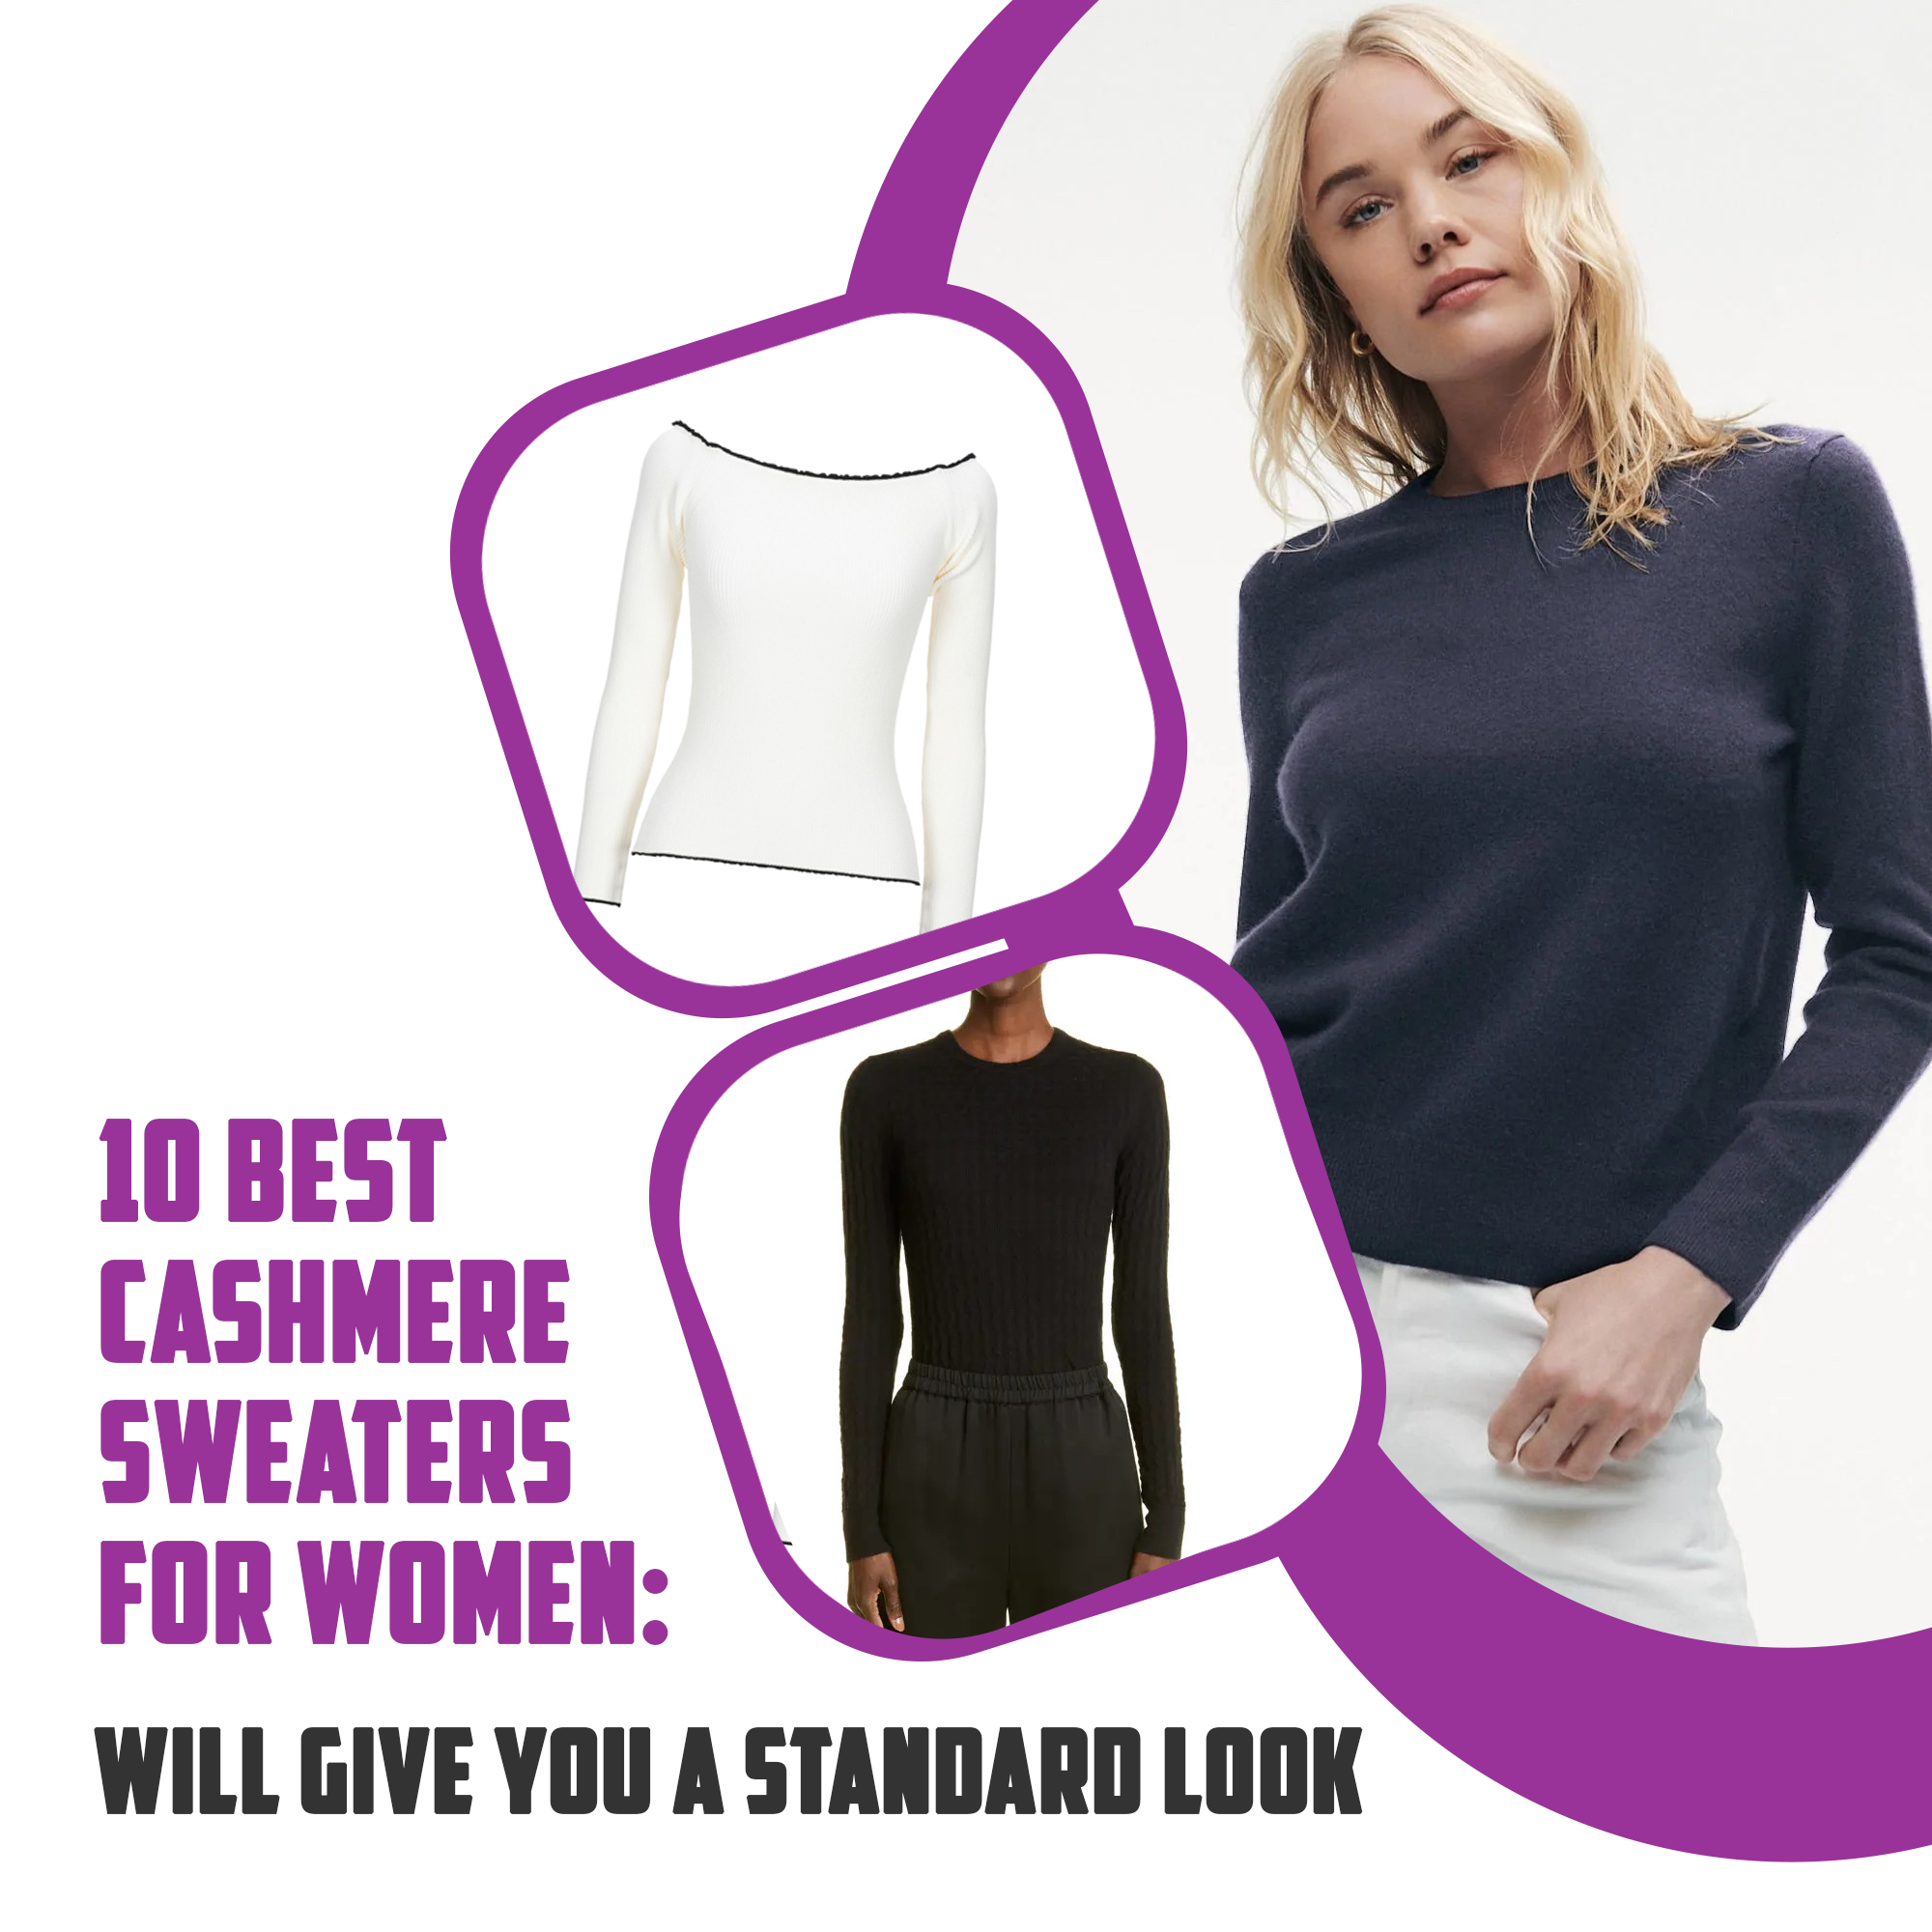 10 Best Cashmere Sweaters For Women: Will Give You A Standard Look